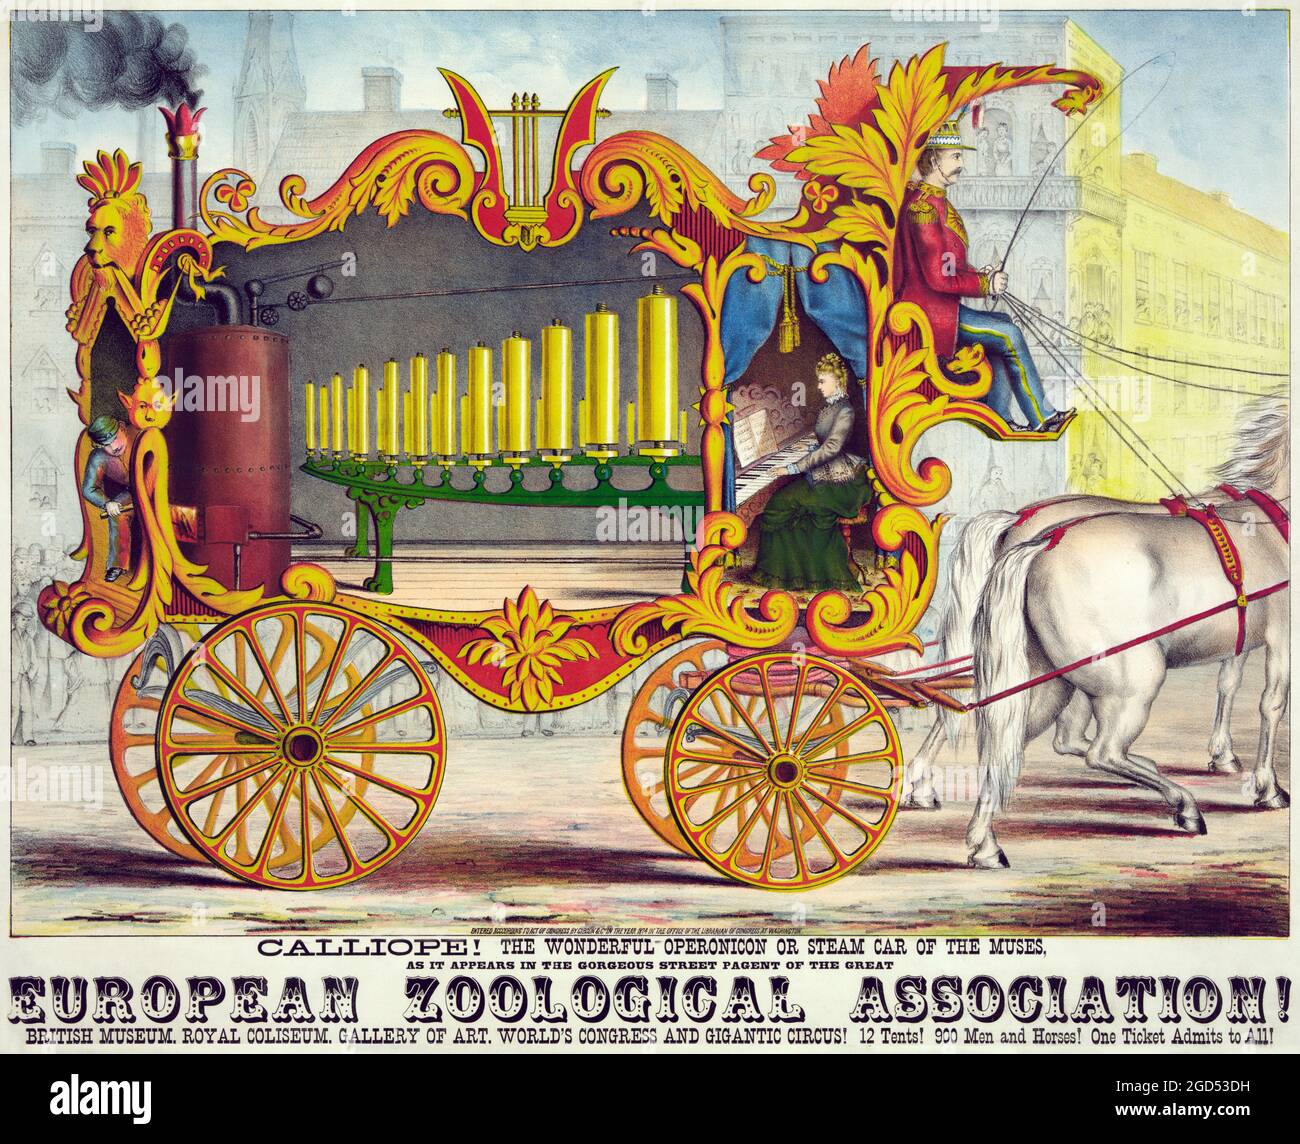 Vintage Circus poster - Calliope, the wonderful operonicon or steam car of the muses, advertising poster, 1874. EUROPEAN ZOOLOGICAL ASSOCIATION! Stock Photo